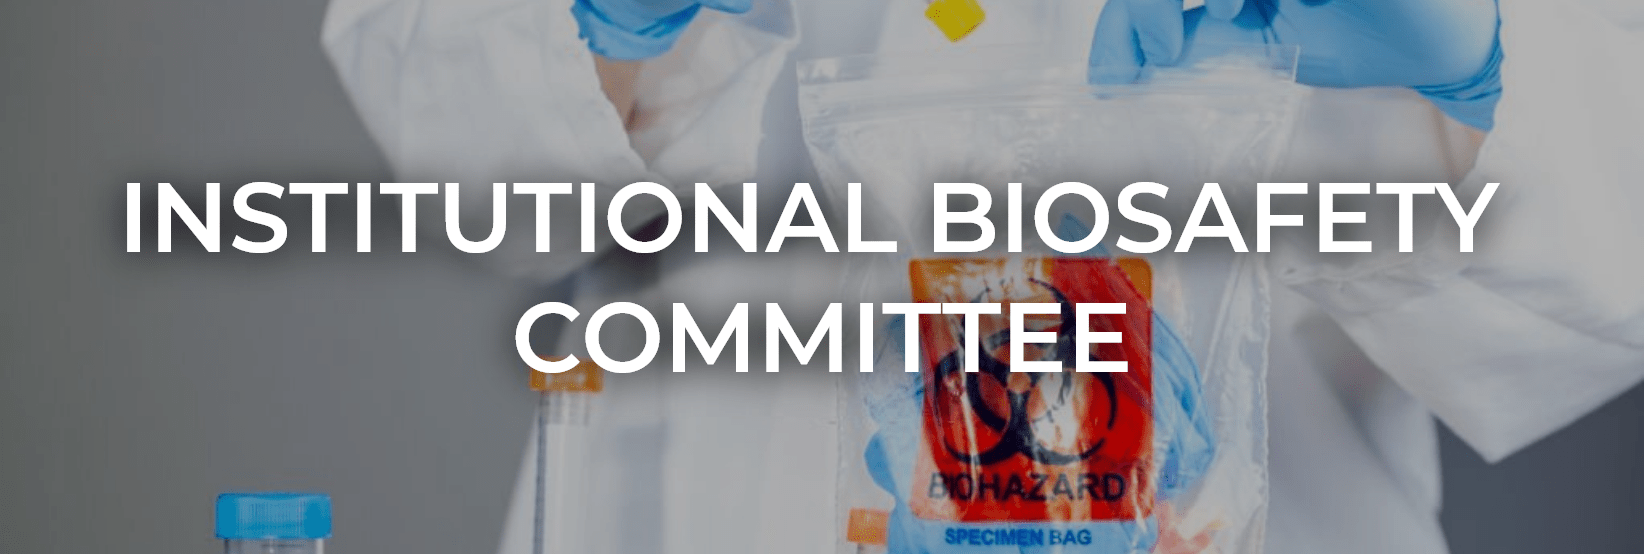 Institutional Biosafety Committee-min